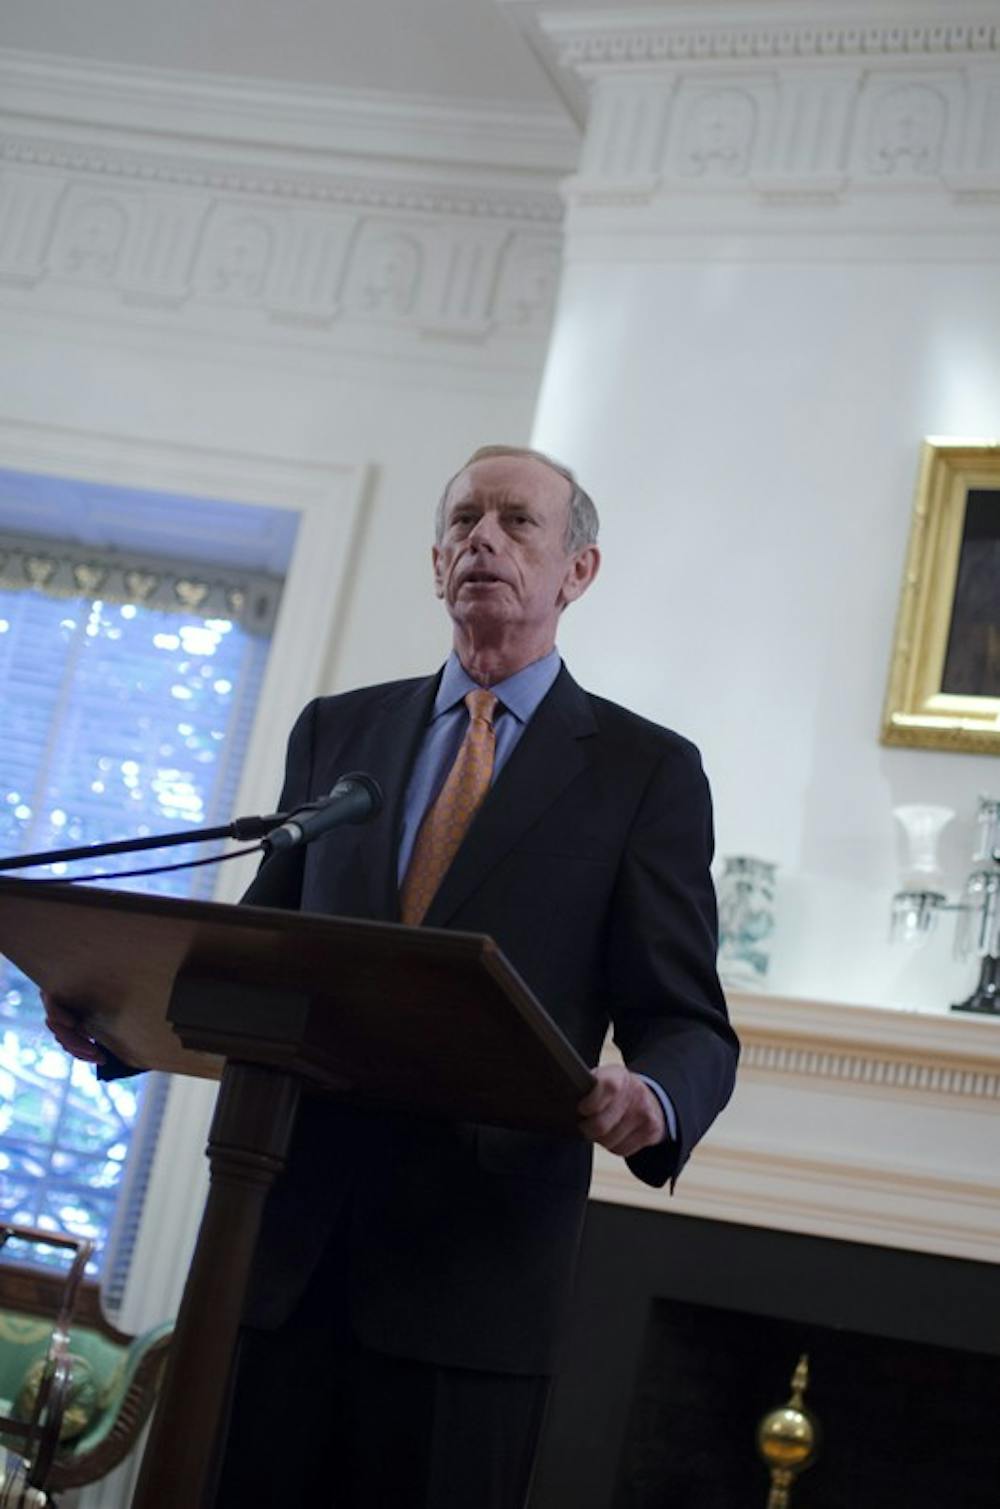 	<p>Patrick D. Hogan was announced as the new Executive Vice President/Chief Operations Officer of the University of Virginia on Friday morning, October 19</p>